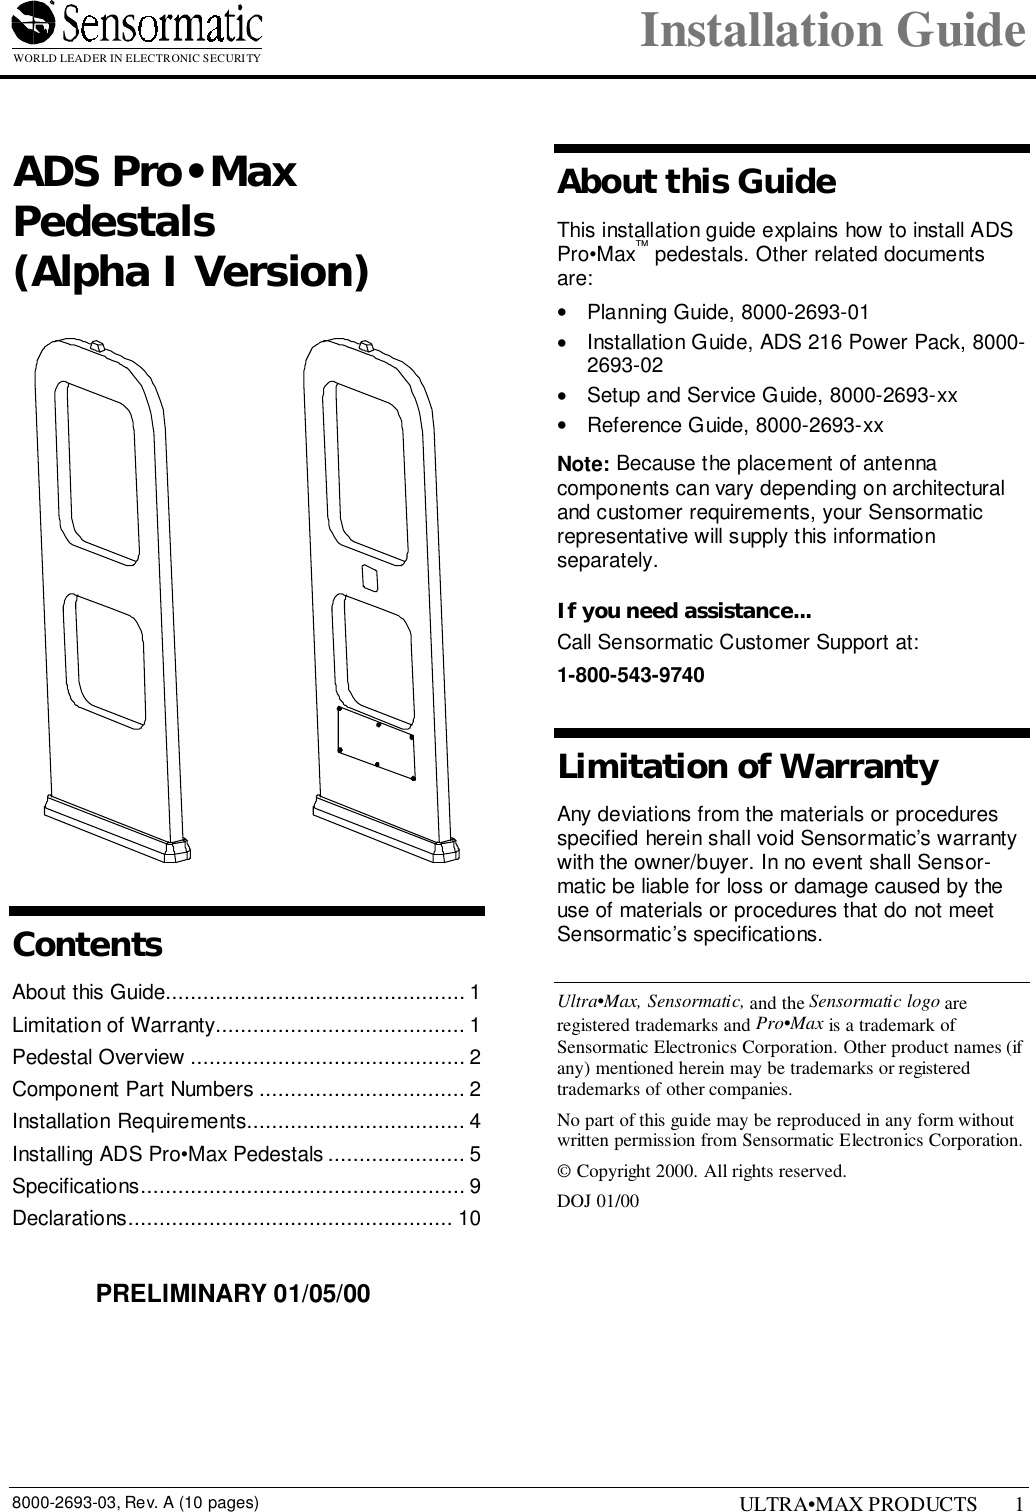 WORLD LEADER IN ELECTRONIC SECURITY Installation Guide8000-2693-03, Rev. A (10 pages) ULTRA•MAX PRODUCTS 11 ADS Pro•MaxPedestals(Alpha I Version)ContentsAbout this Guide................................................ 1Limitation of Warranty........................................ 1Pedestal Overview ............................................ 2Component Part Numbers ................................. 2Installation Requirements................................... 4Installing ADS Pro•Max Pedestals ...................... 5Specifications.................................................... 9Declarations.................................................... 10About this GuideThis installation guide explains how to install ADSPro•Max™ pedestals. Other related documentsare:•  Planning Guide, 8000-2693-01•  Installation Guide, ADS 216 Power Pack, 8000-2693-02•  Setup and Service Guide, 8000-2693-xx•  Reference Guide, 8000-2693-xxNote: Because the placement of antennacomponents can vary depending on architecturaland customer requirements, your Sensormaticrepresentative will supply this informationseparately.If you need assistance...Call Sensormatic Customer Support at:1-800-543-9740Limitation of WarrantyAny deviations from the materials or proceduresspecified herein shall void Sensormatic’s warrantywith the owner/buyer. In no event shall Sensor-matic be liable for loss or damage caused by theuse of materials or procedures that do not meetSensormatic’s specifications.Ultra•Max, Sensormatic, and the Sensormatic logo areregistered trademarks and Pro•Max is a trademark ofSensormatic Electronics Corporation. Other product names (ifany) mentioned herein may be trademarks or registeredtrademarks of other companies.No part of this guide may be reproduced in any form withoutwritten permission from Sensormatic Electronics Corporation.© Copyright 2000. All rights reserved.DOJ 01/00PRELIMINARY 01/05/00